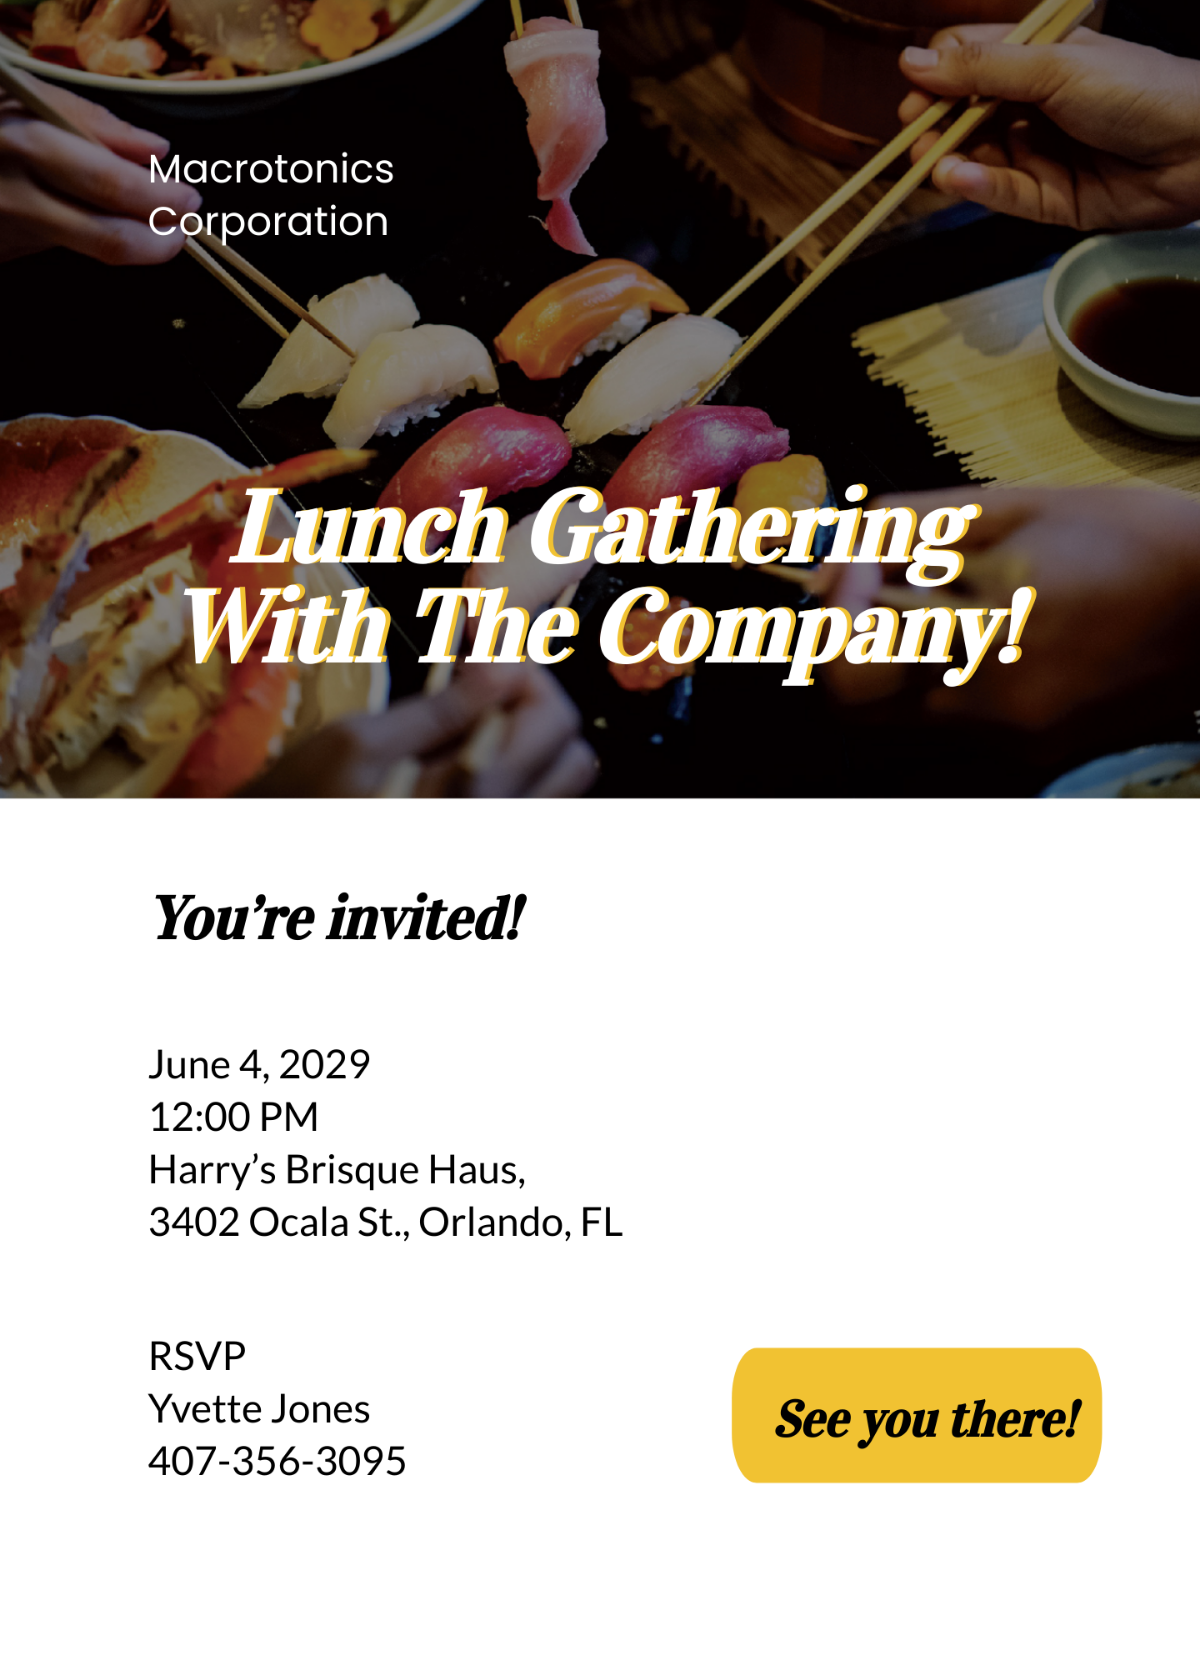 Email Lunch Invitation Template